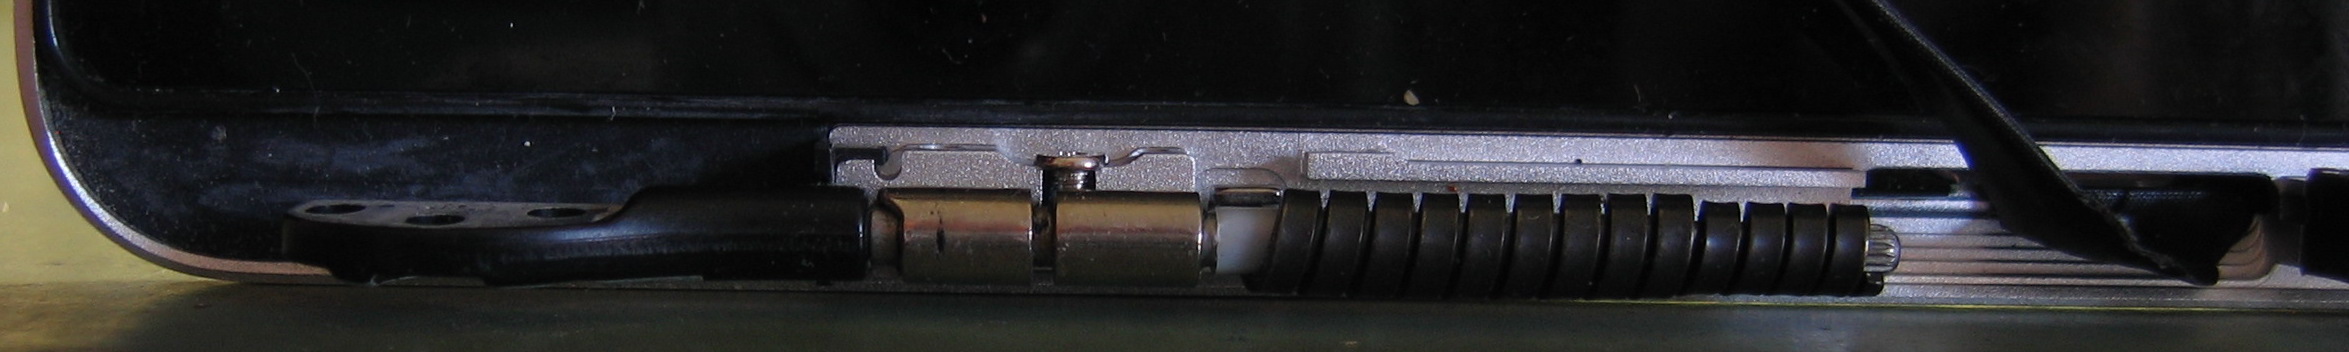 Close-up of left hinge/mounting bracket assembly, viewed from the side